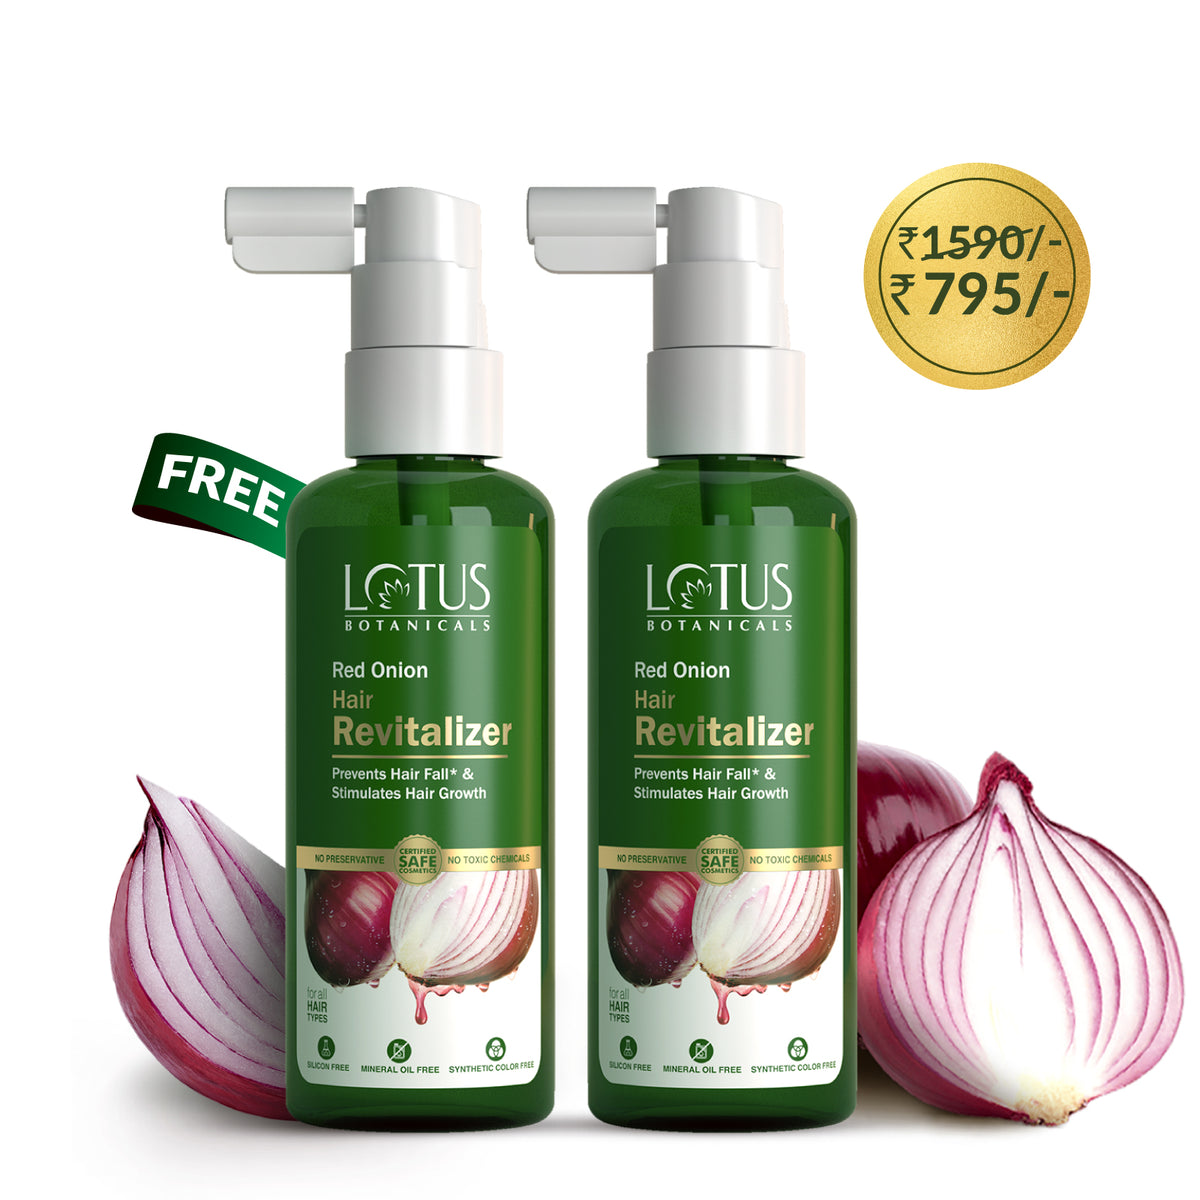 Buy Red Onion Hair Revitalizer, Get another Hair Revitalizer Free